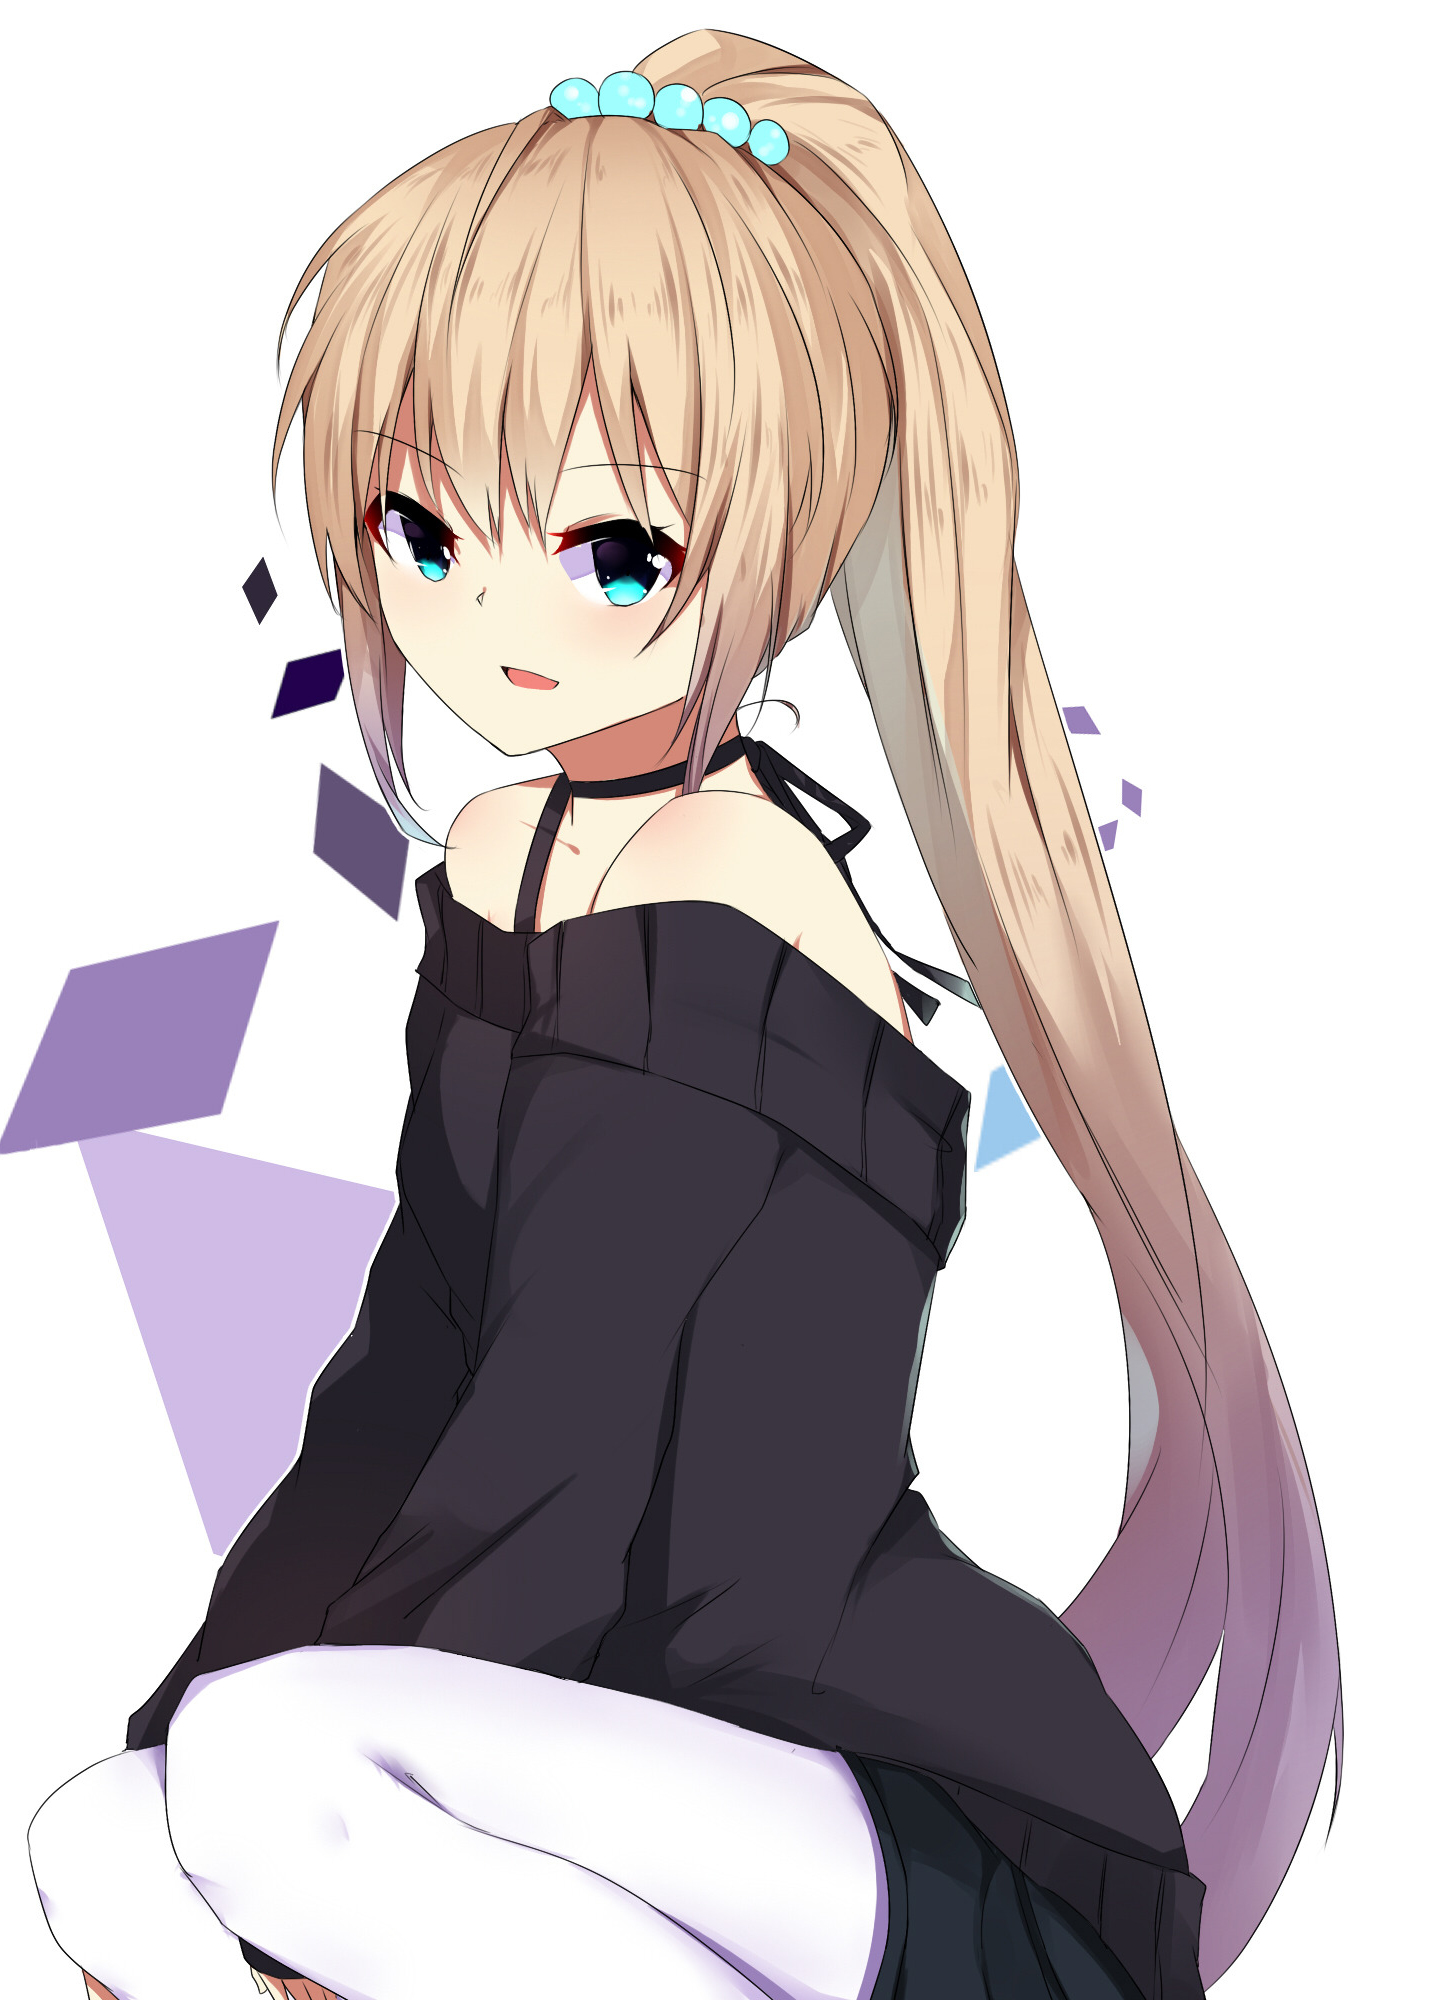 960 Ponytail Anime Images, Stock Photos, 3D objects, & Vectors |  Shutterstock-demhanvico.com.vn